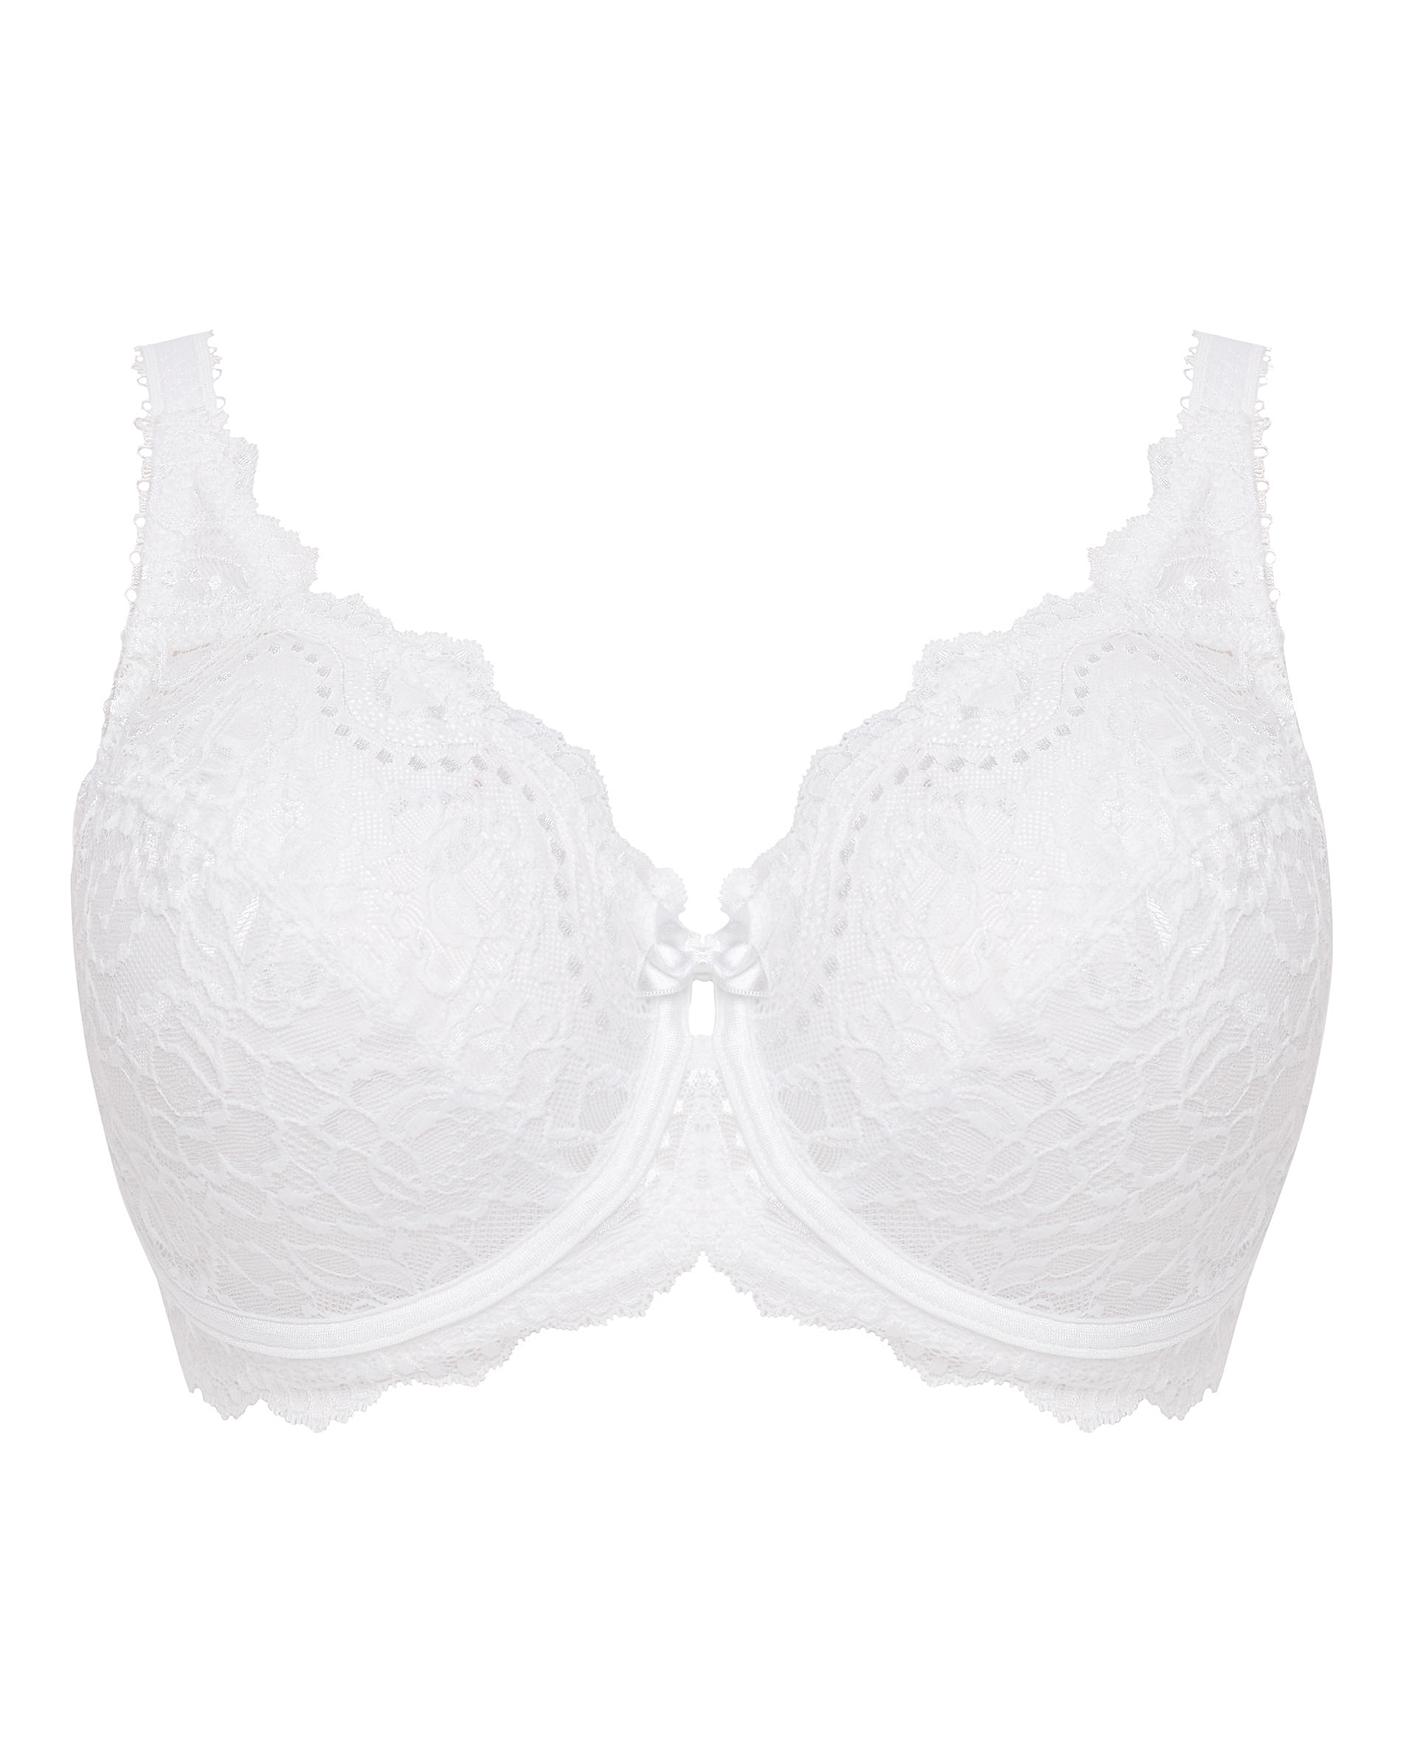 Playtex Flower Lace Full Cup Bra White